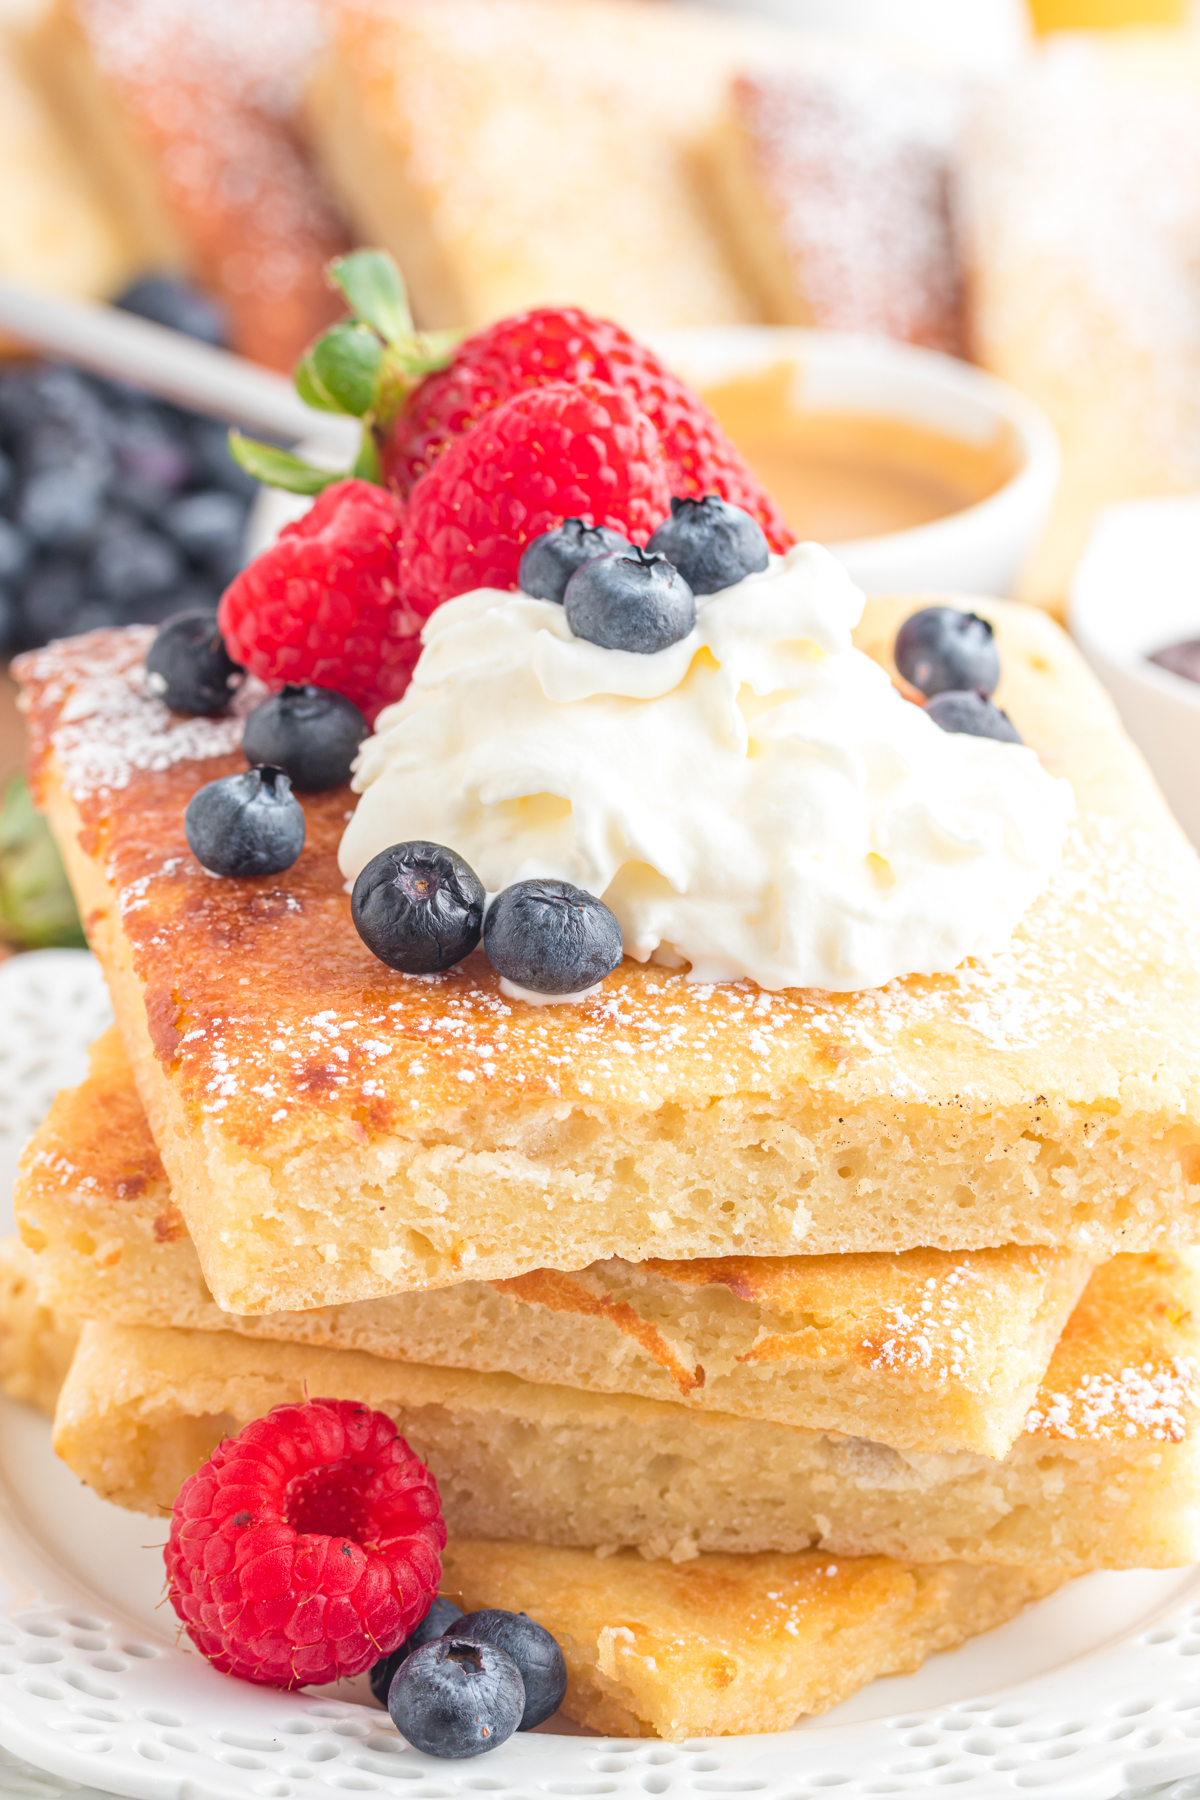 Stack of pancakes on a plate with berries and whipped cream.